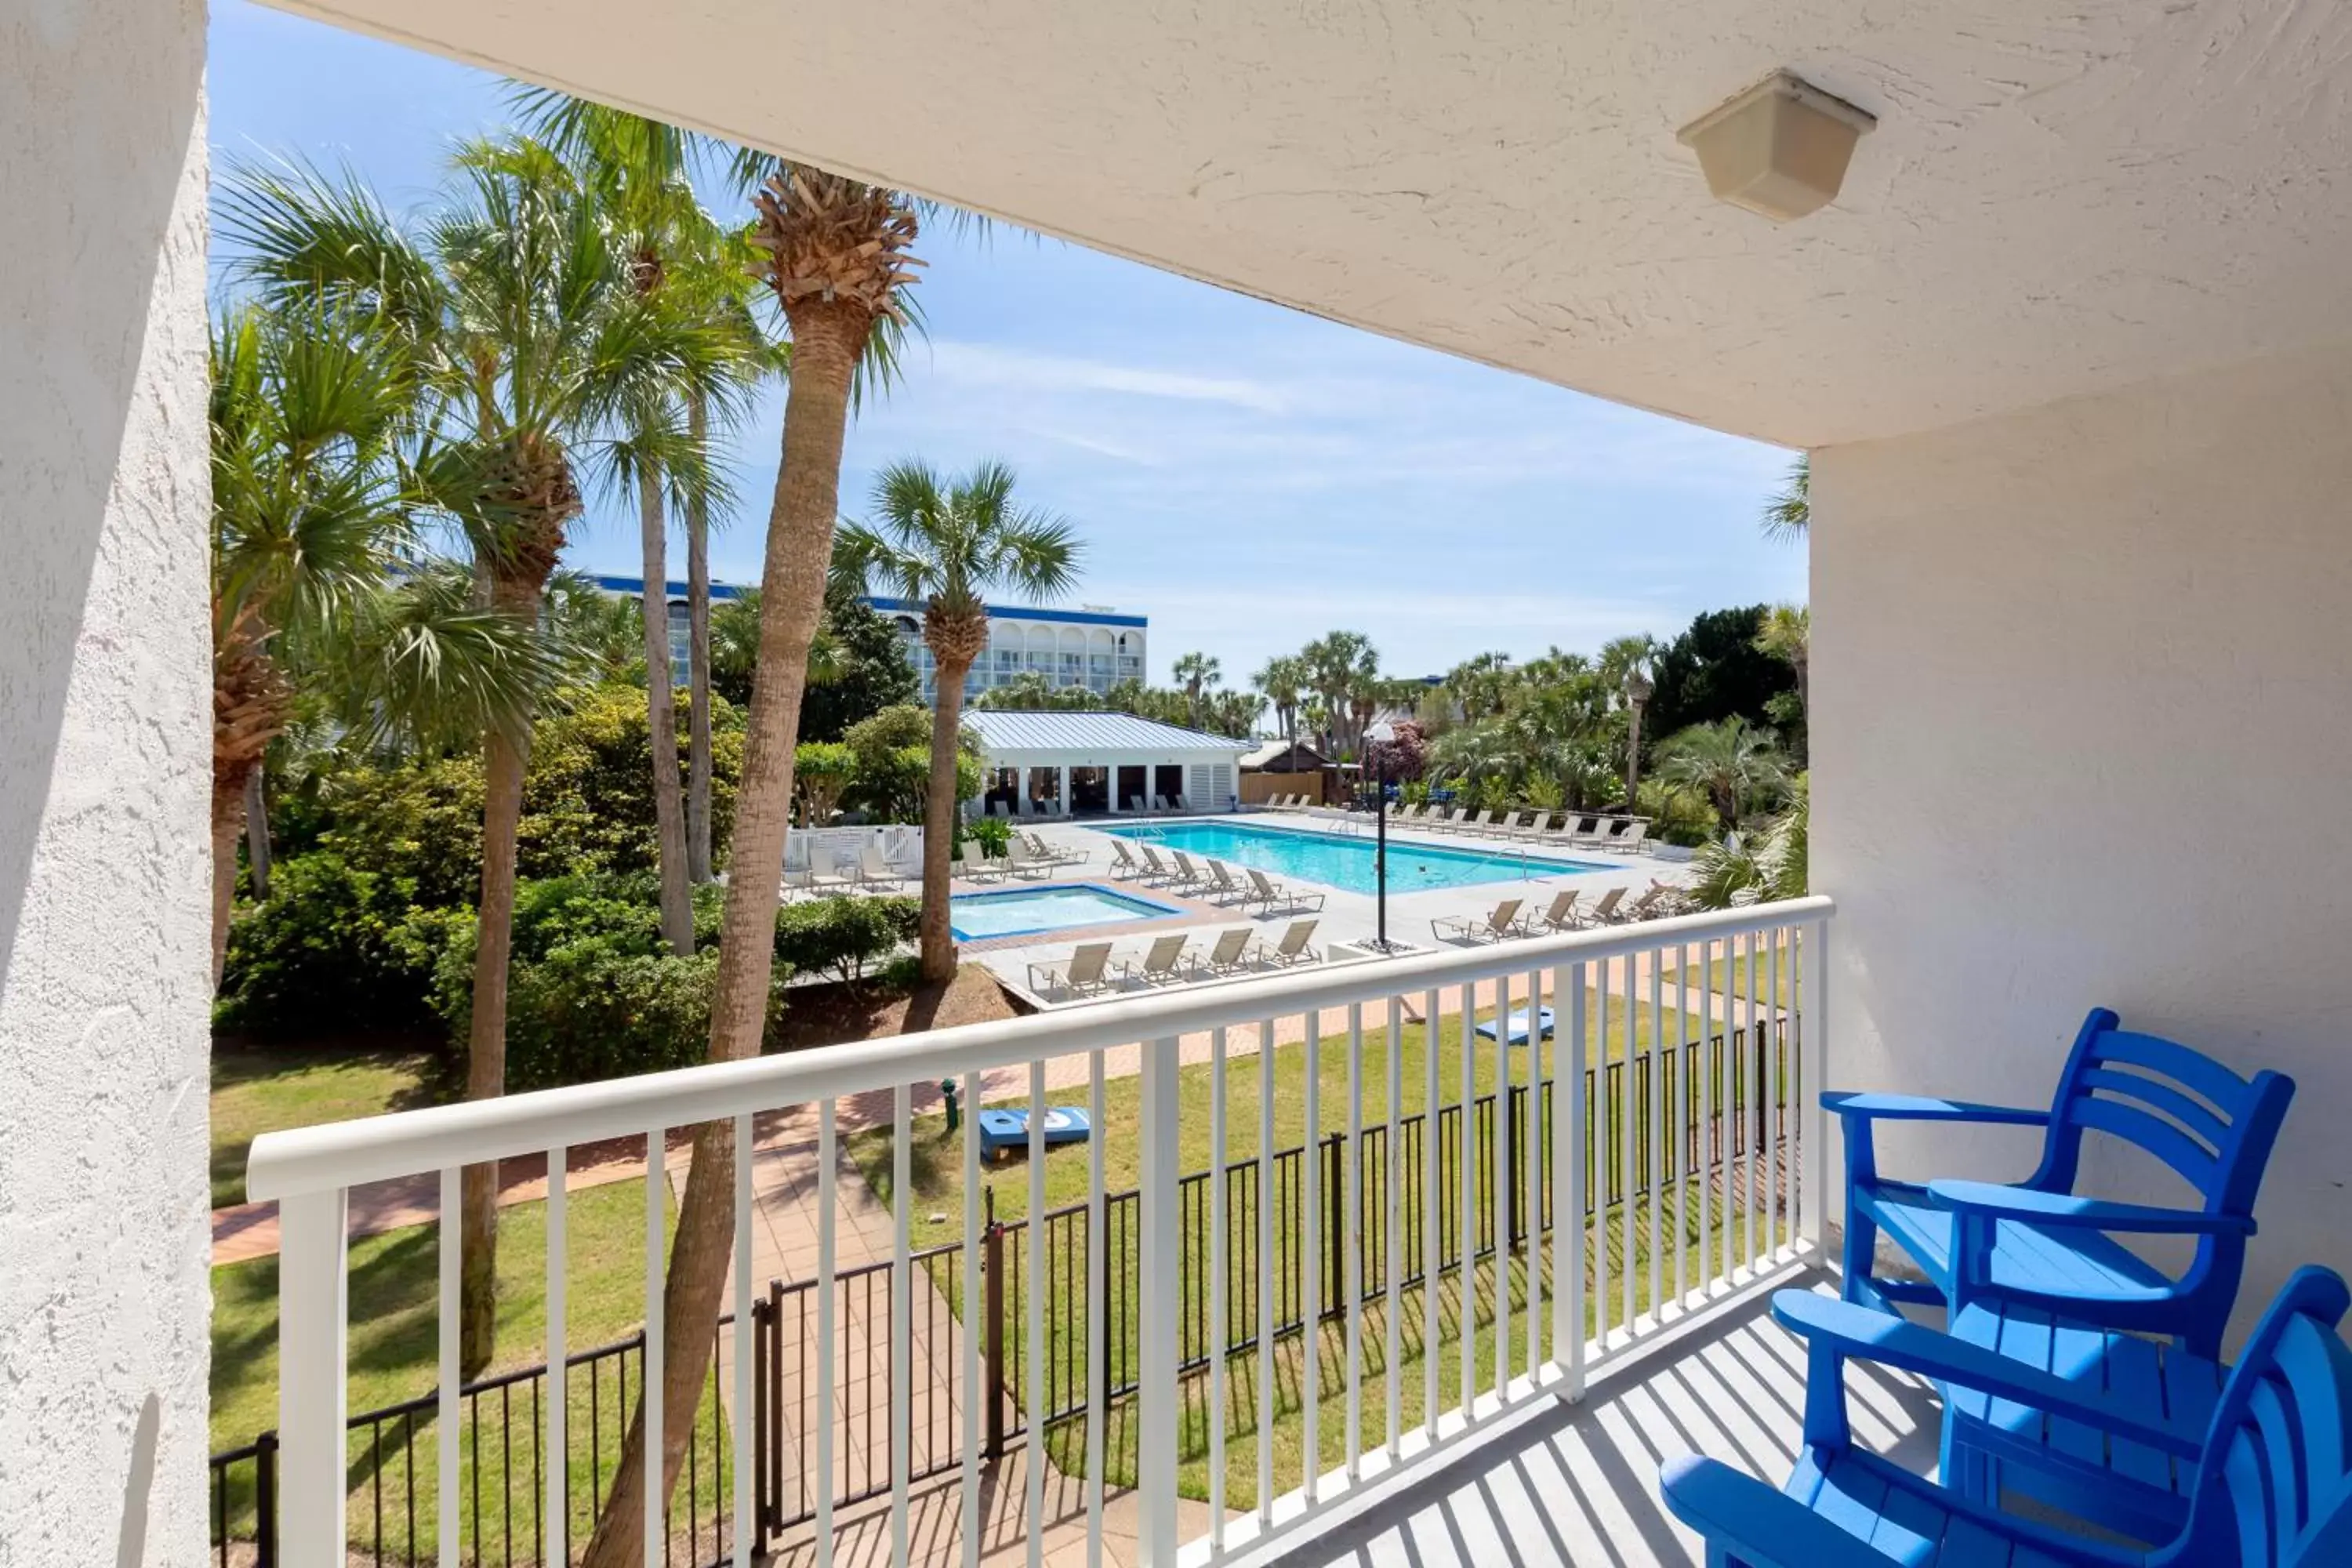 Balcony/Terrace, Pool View in The Island Resort at Fort Walton Beach